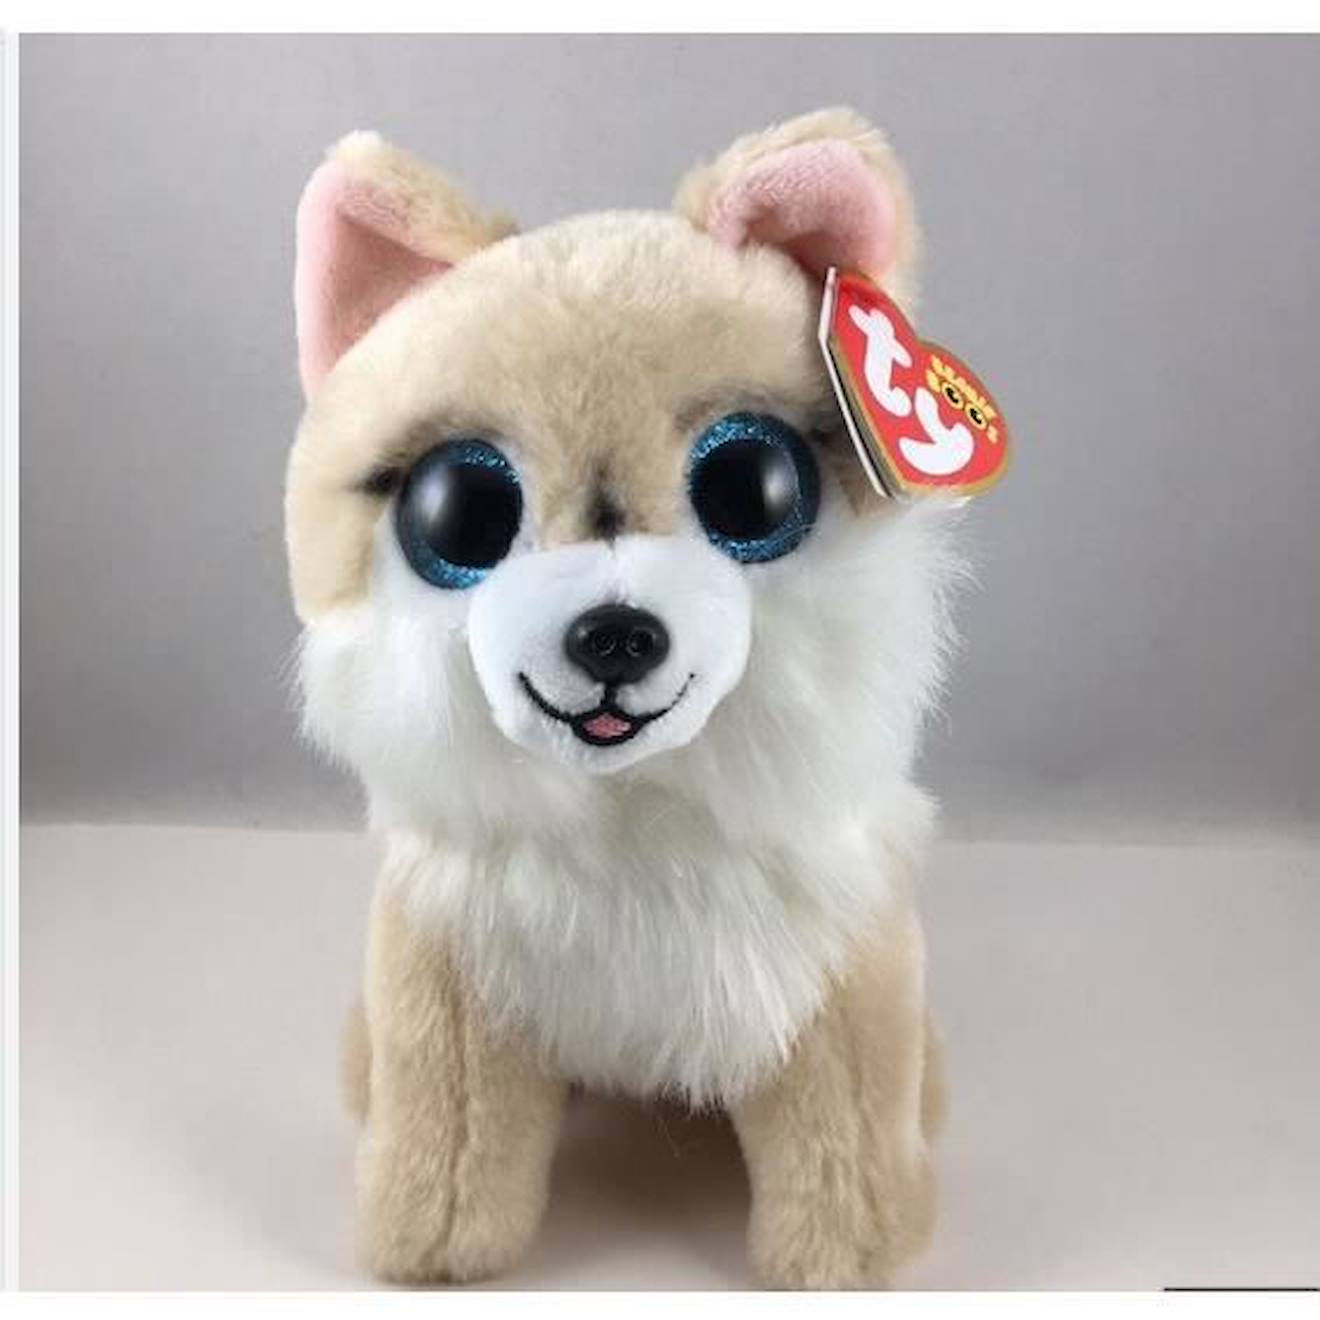 Peluche TY - Beanie Boo's Small Honeycomb le chien - Multicolore